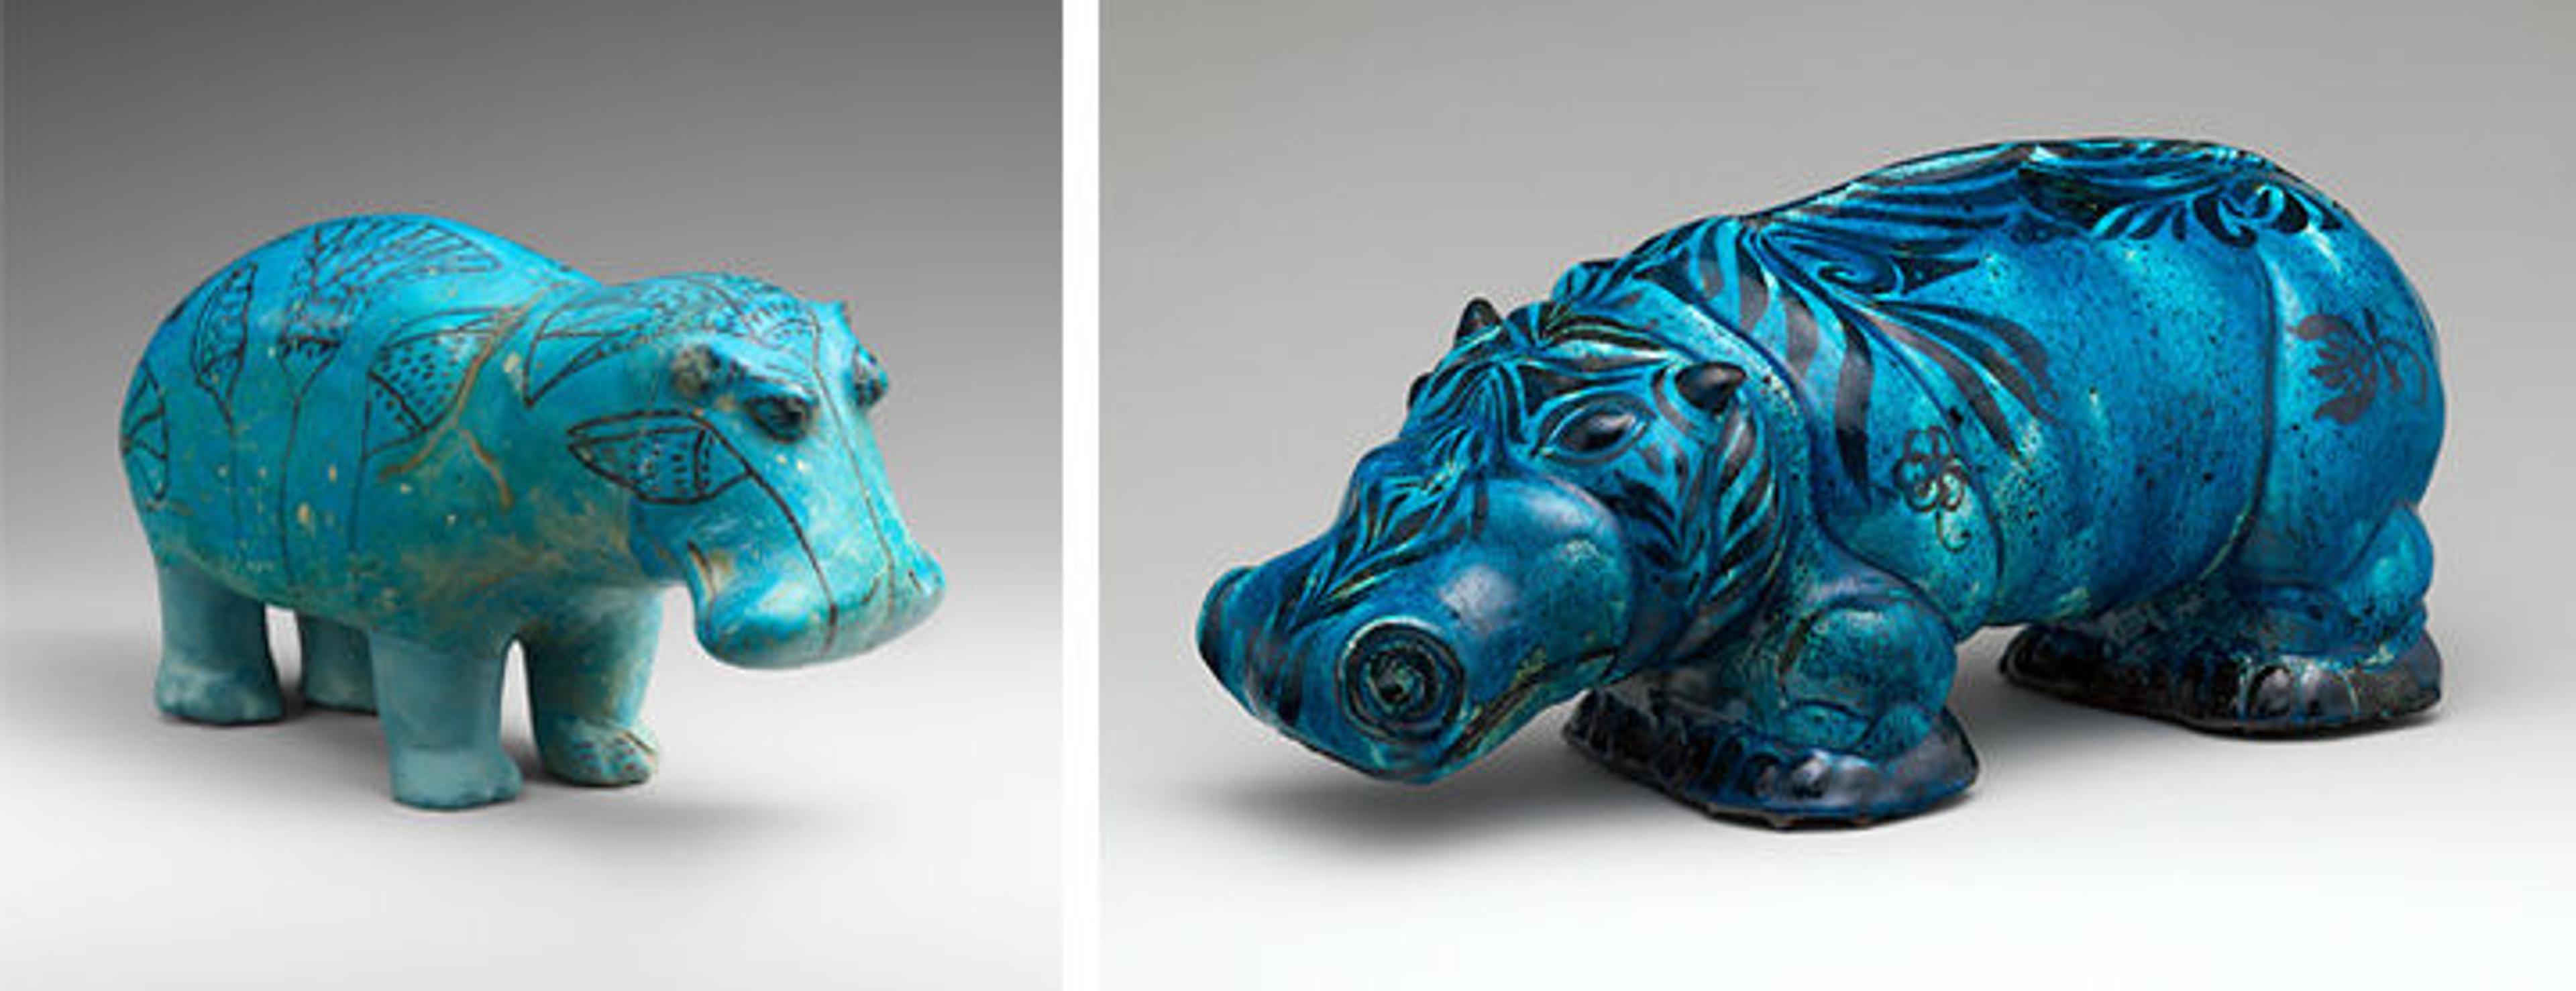 On the left, an ancient Egyptian hippopotamus nicknamed William made with blue faience. On the right, a modern hippopotamus by Carl Walters made with earthenware and blue glaze.  